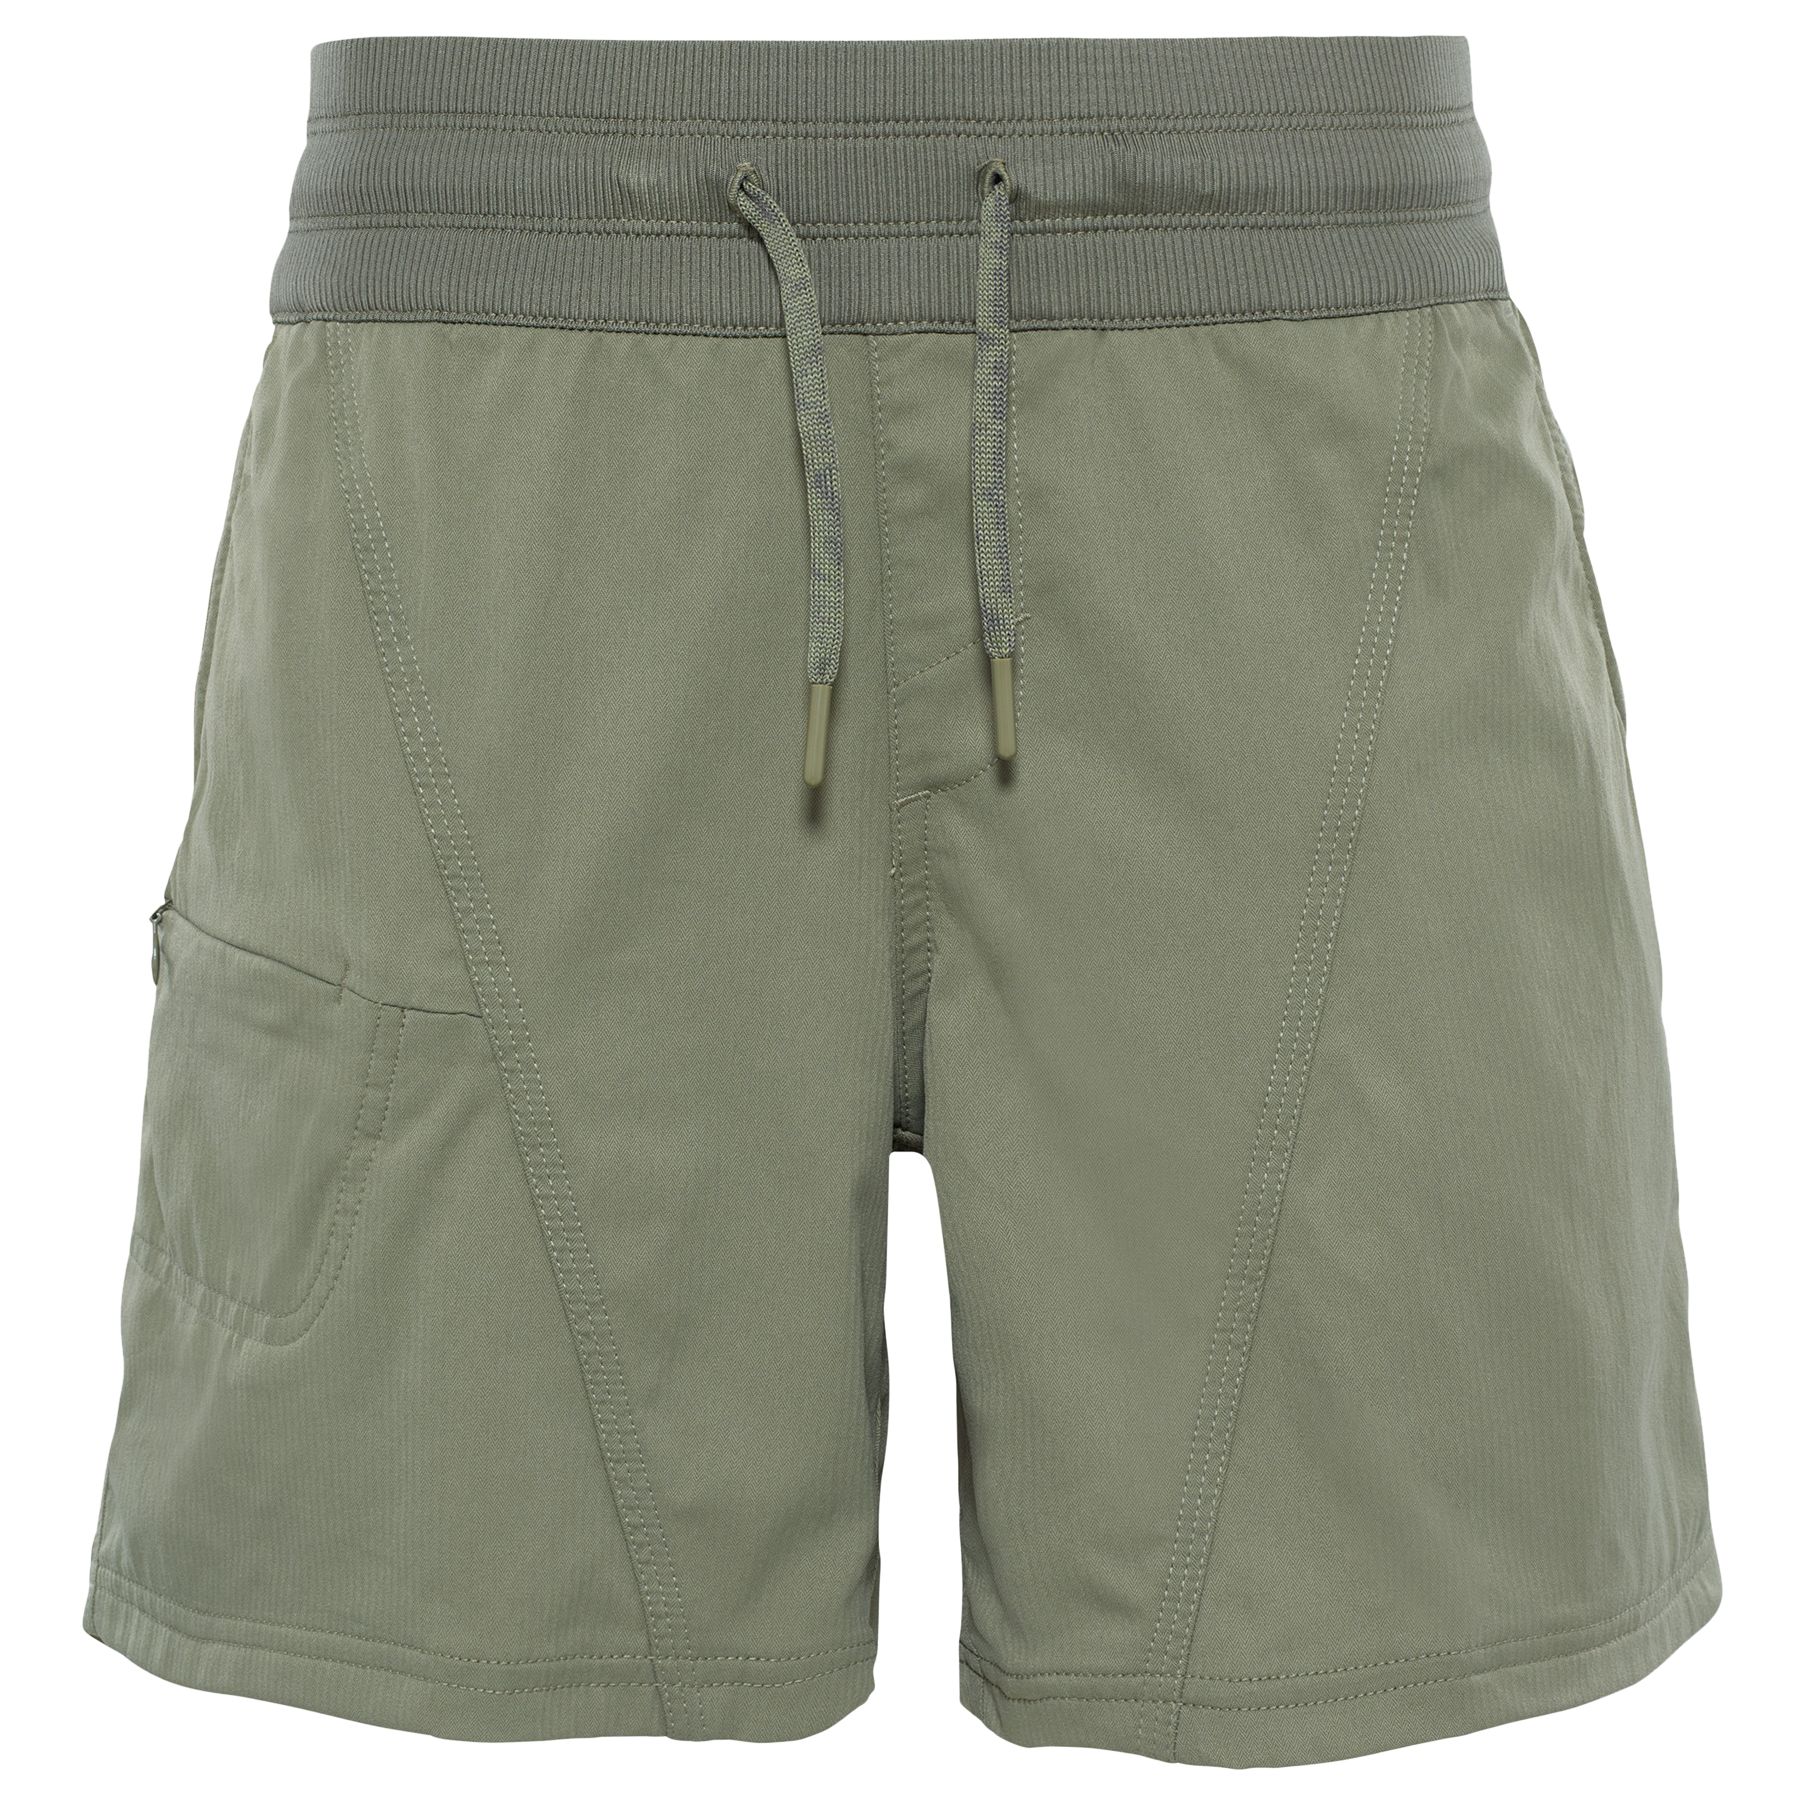 The North Face Reactor Aphrodite Shorts, Green, XS